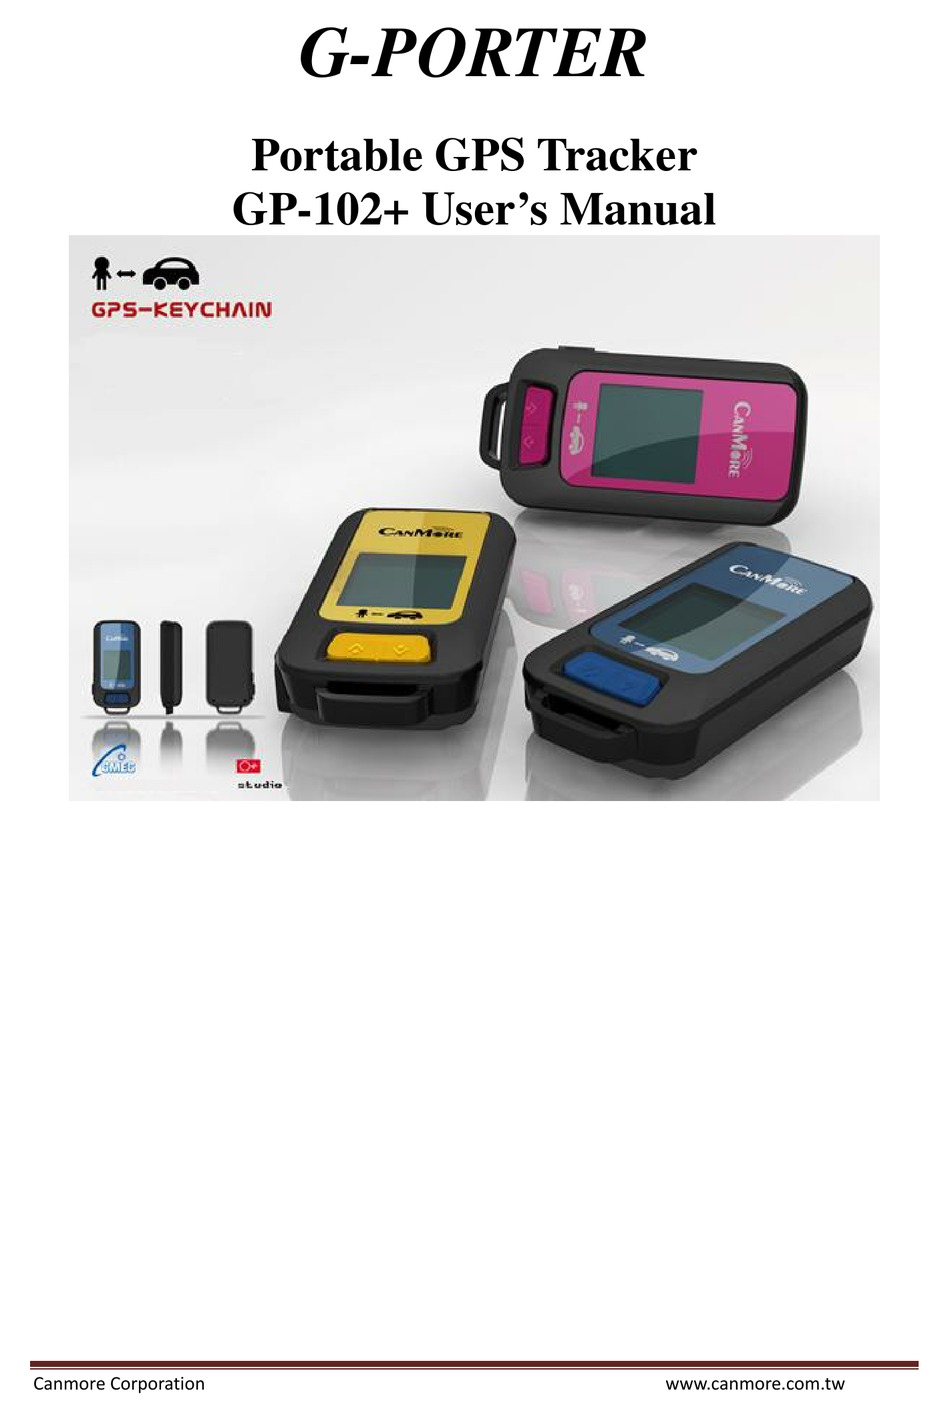 Yellow Multifunction GPS Device/Data Logger CANMORE G-Porter GP-102 